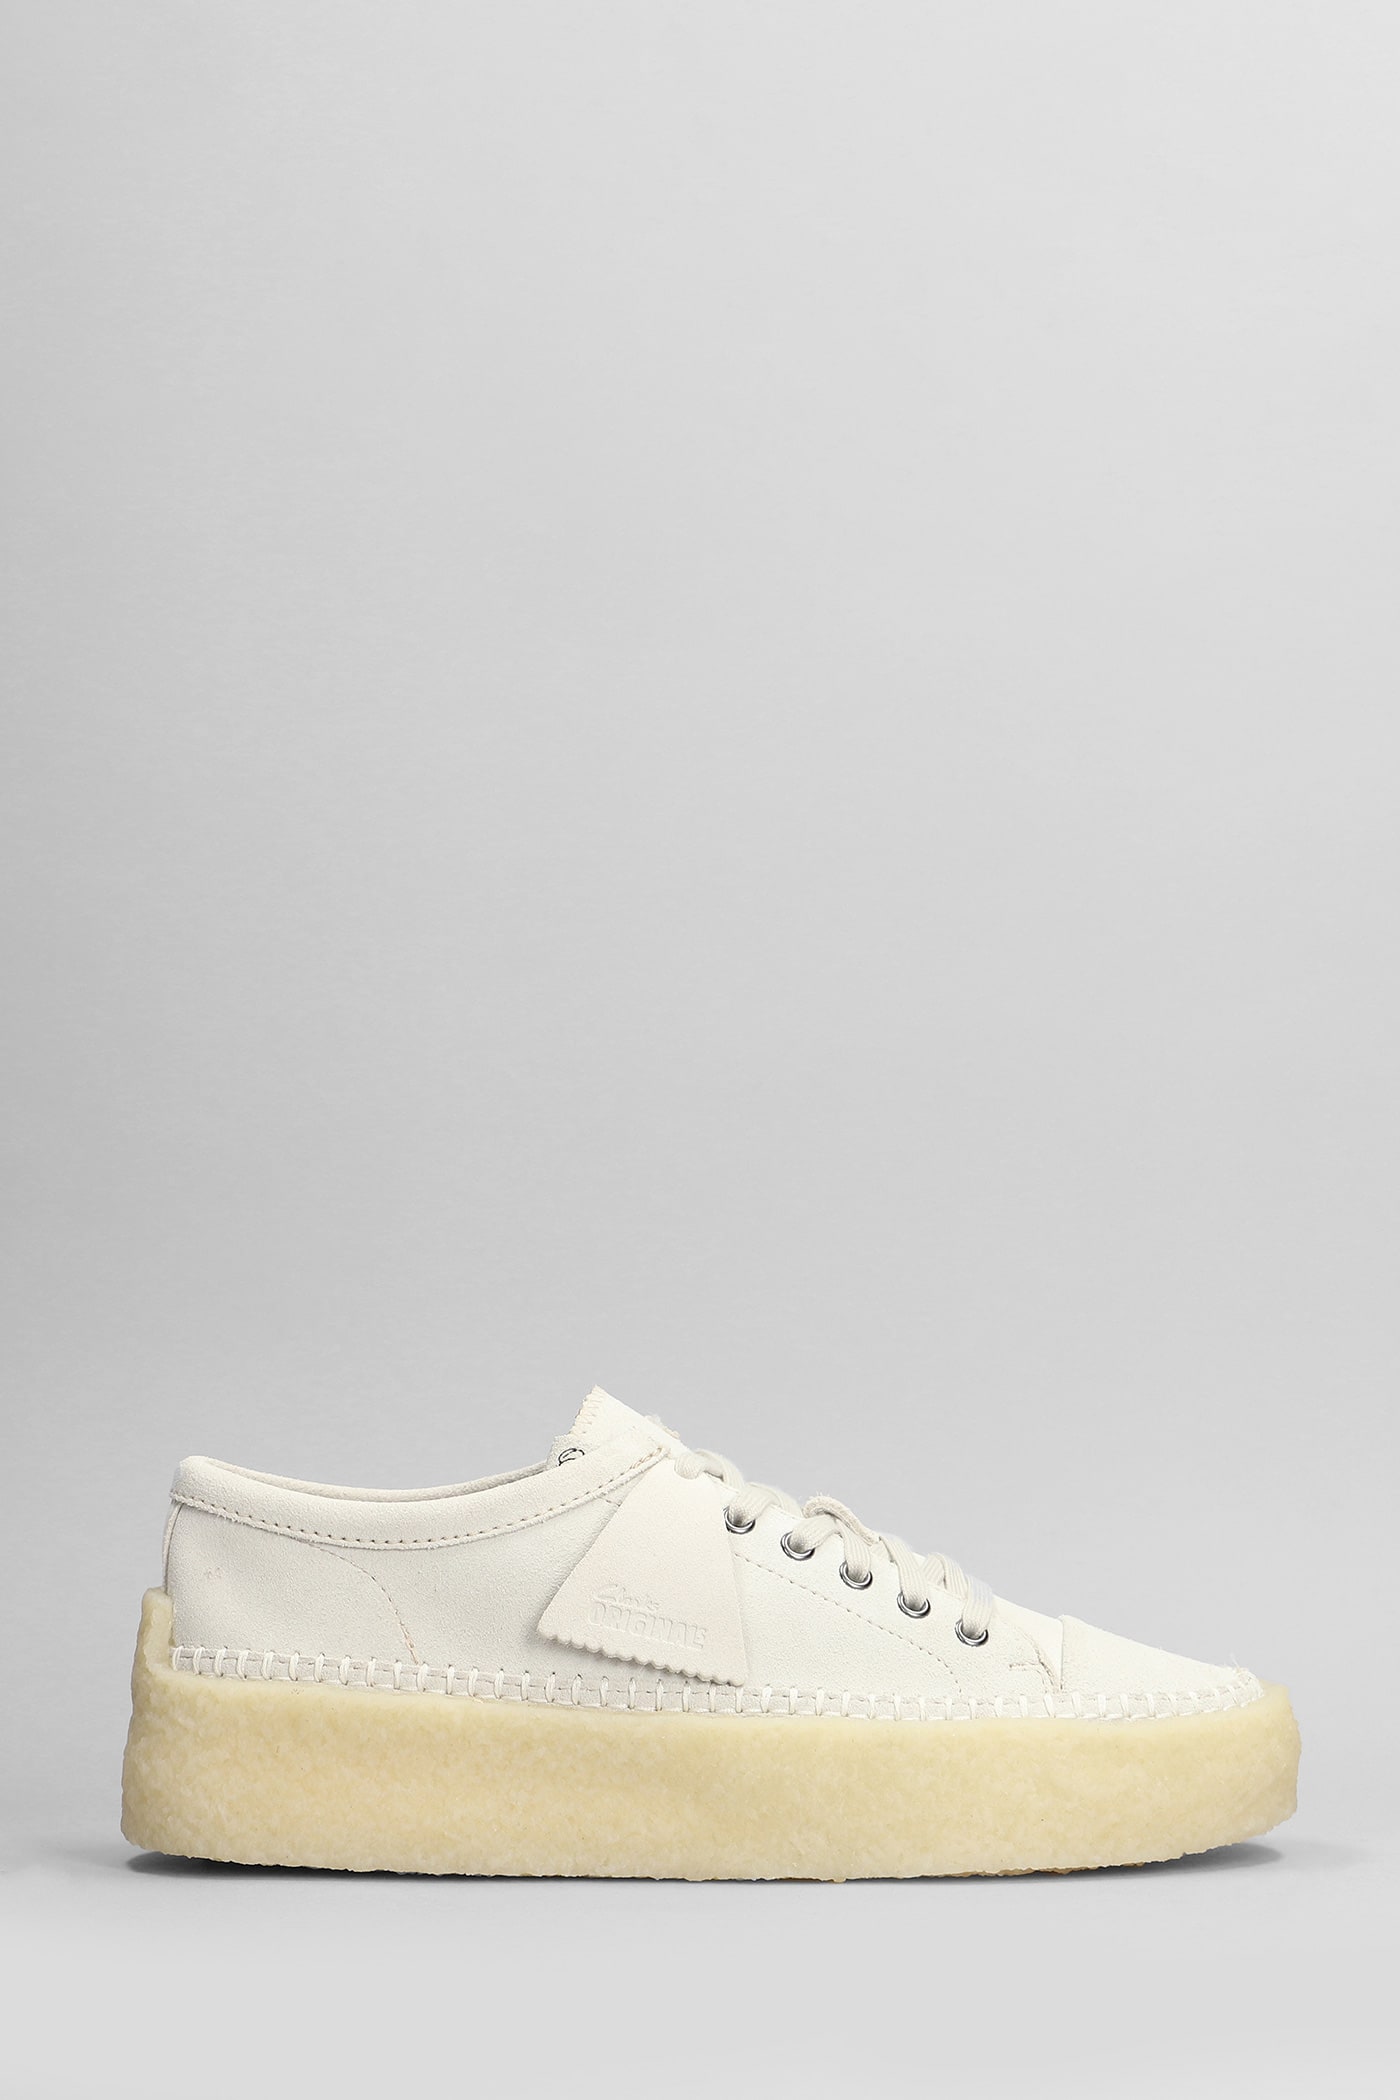 Clarks Caravan Low Lace Up Shoes In White Suede